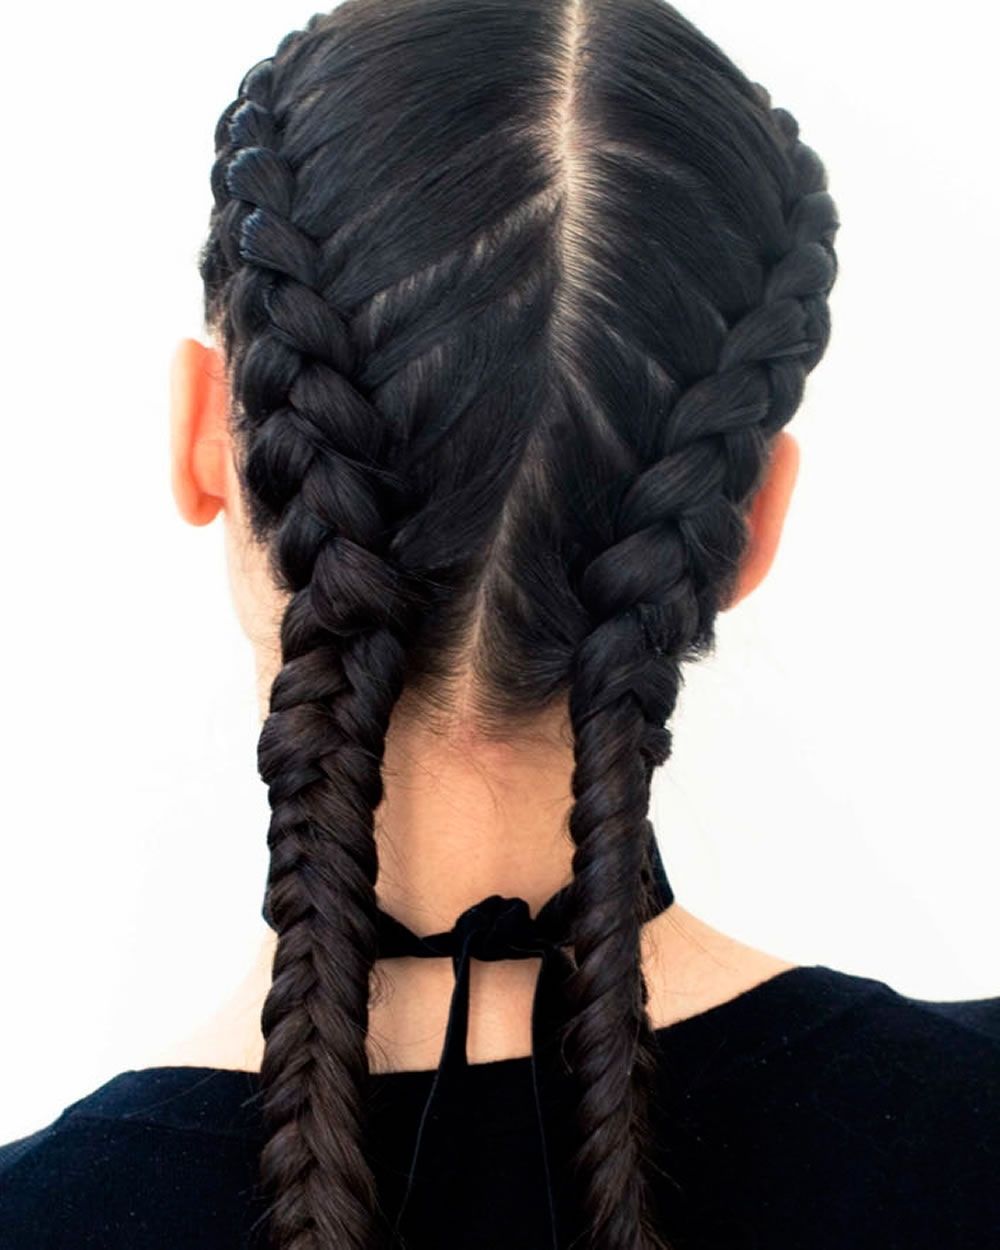 21 French Braid Hairstyles – All You Need To Know About French Within Most Recently Released Double Floating Braid Hairstyles (View 10 of 20)